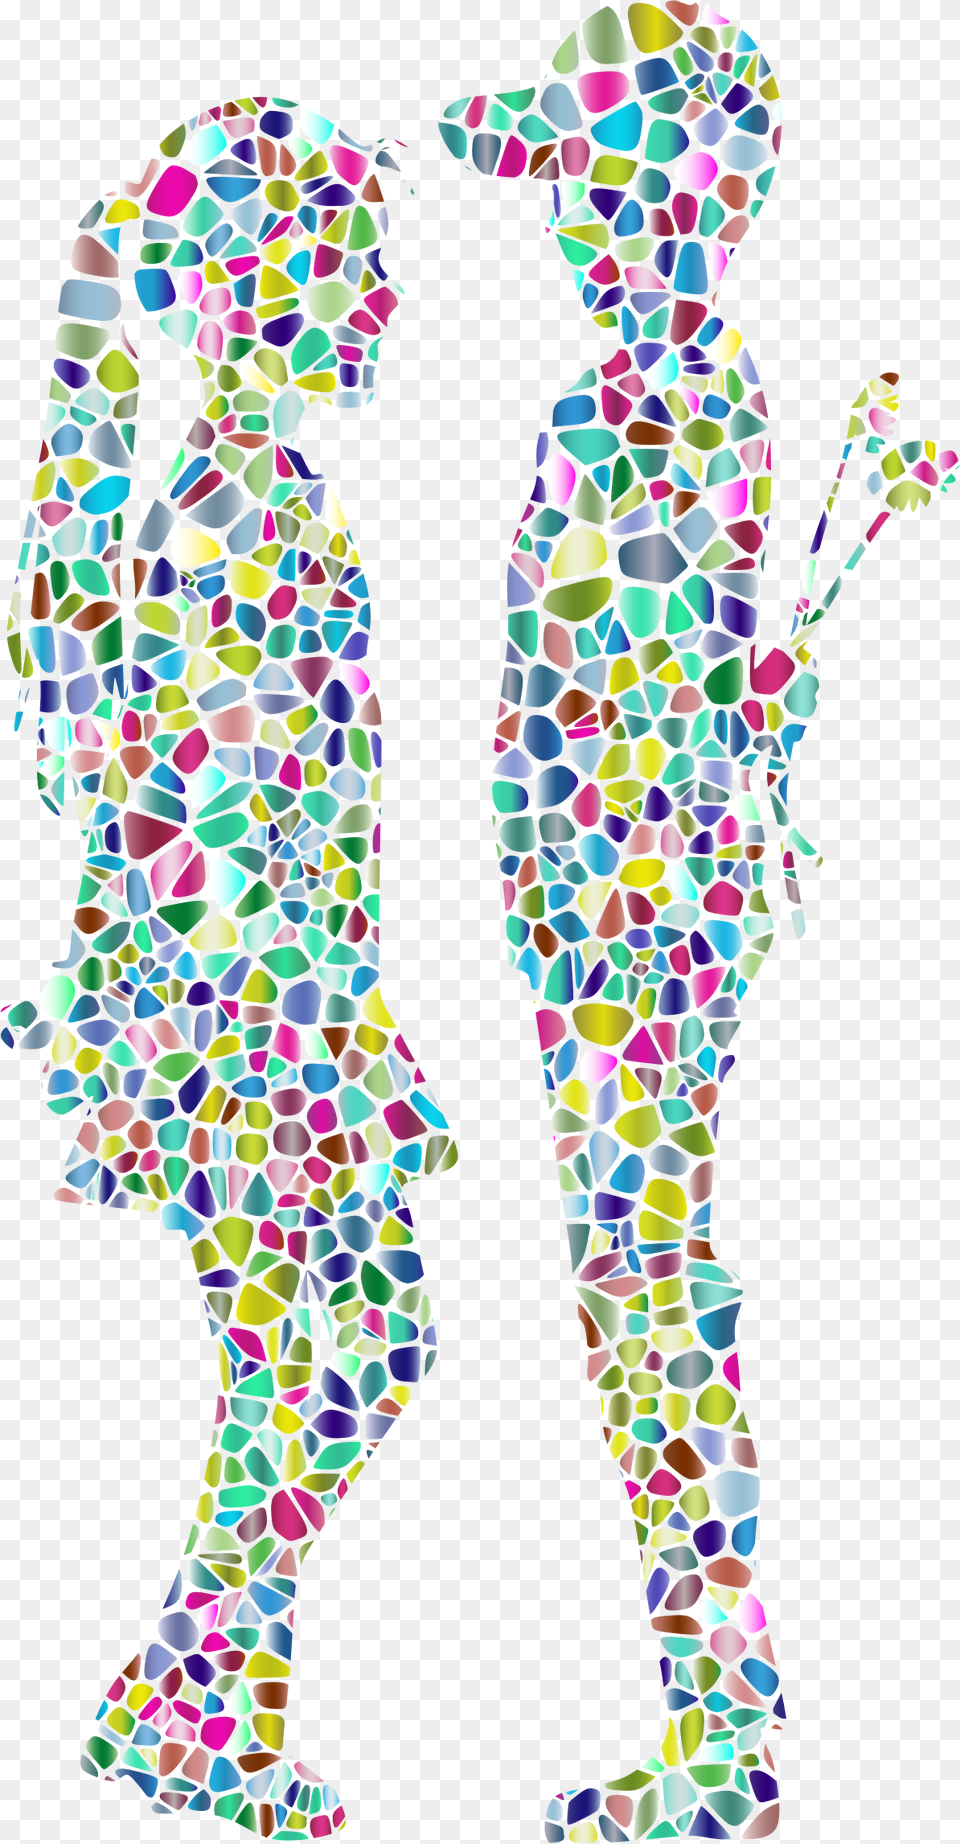 Polyprismatic Tiled Boy Giving Flowers To Girl Silhouette Silhouette With A Boy And Girl, Art, Person, Mosaic, Tile Free Png Download